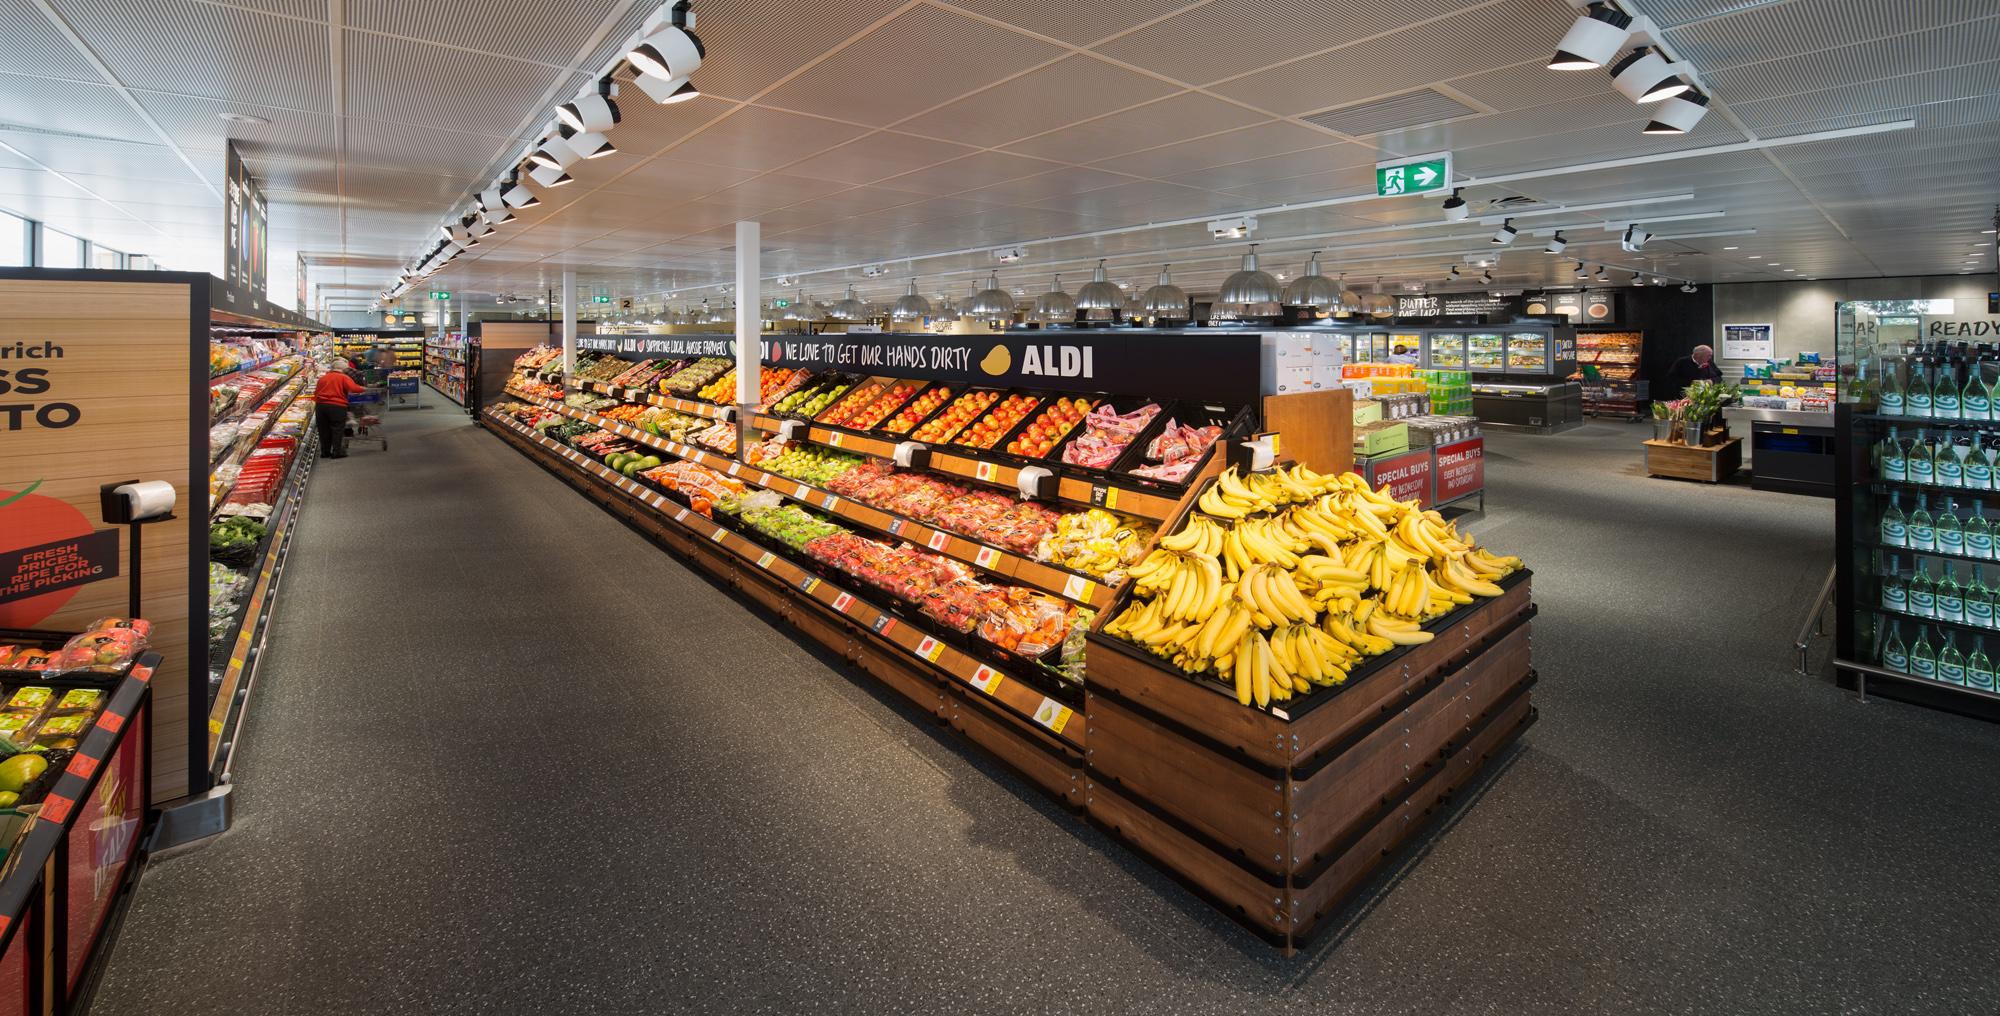 Interior view of ALDI store showing the fruit display